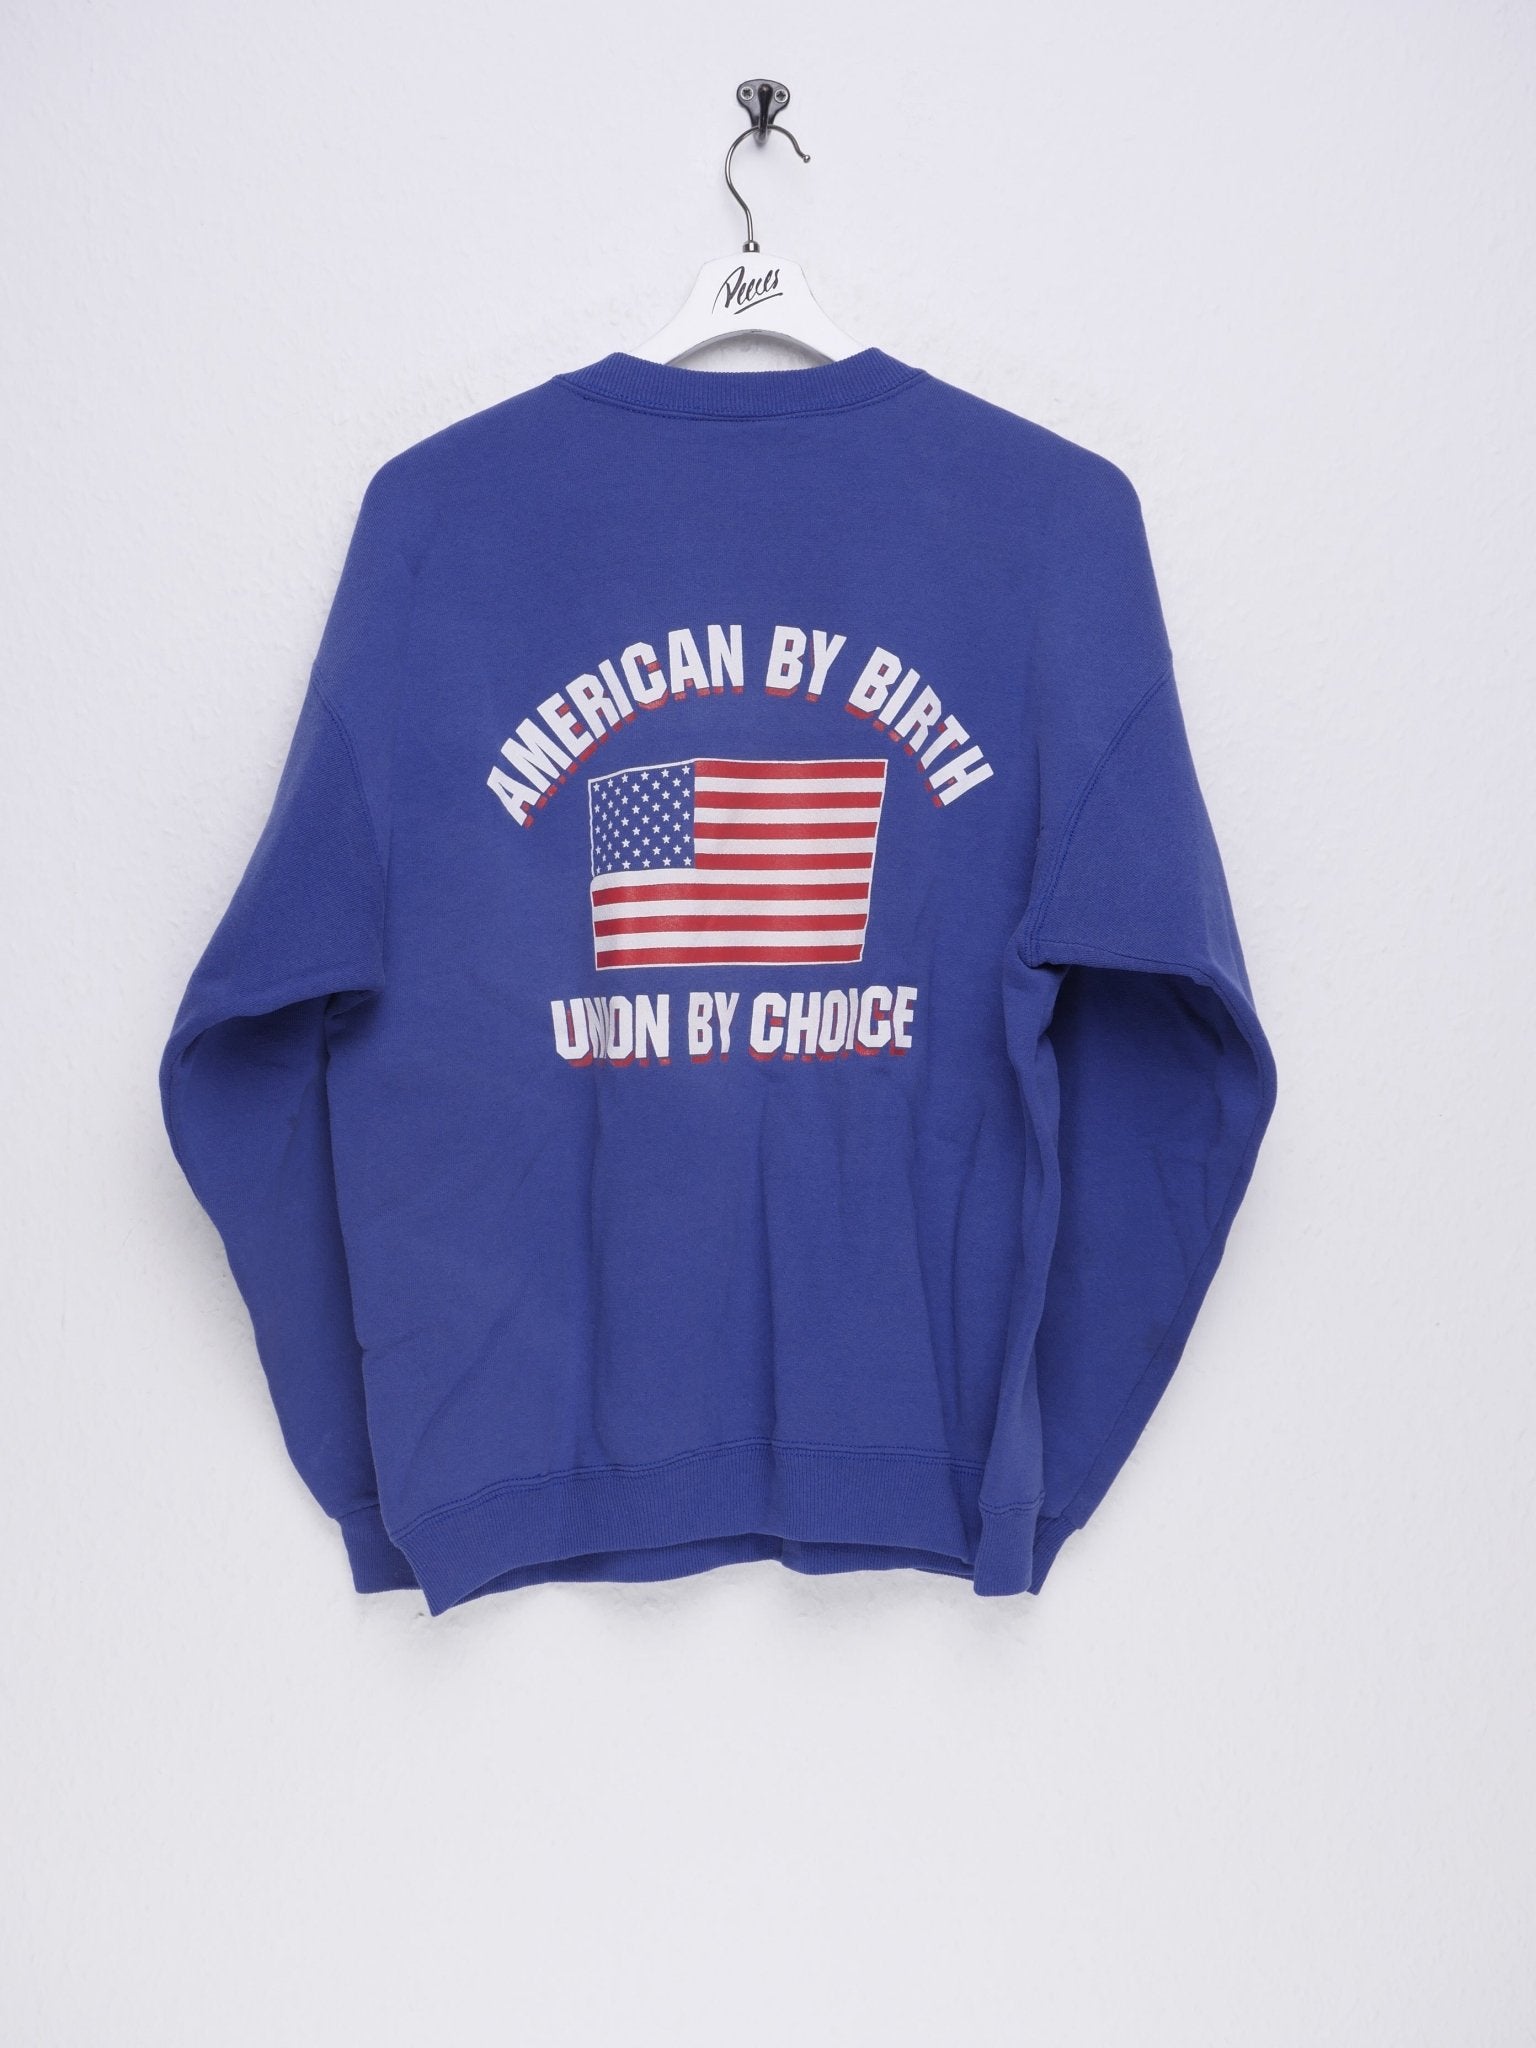 Lee printed American by Birth Spellout Vintage Sweater - Peeces